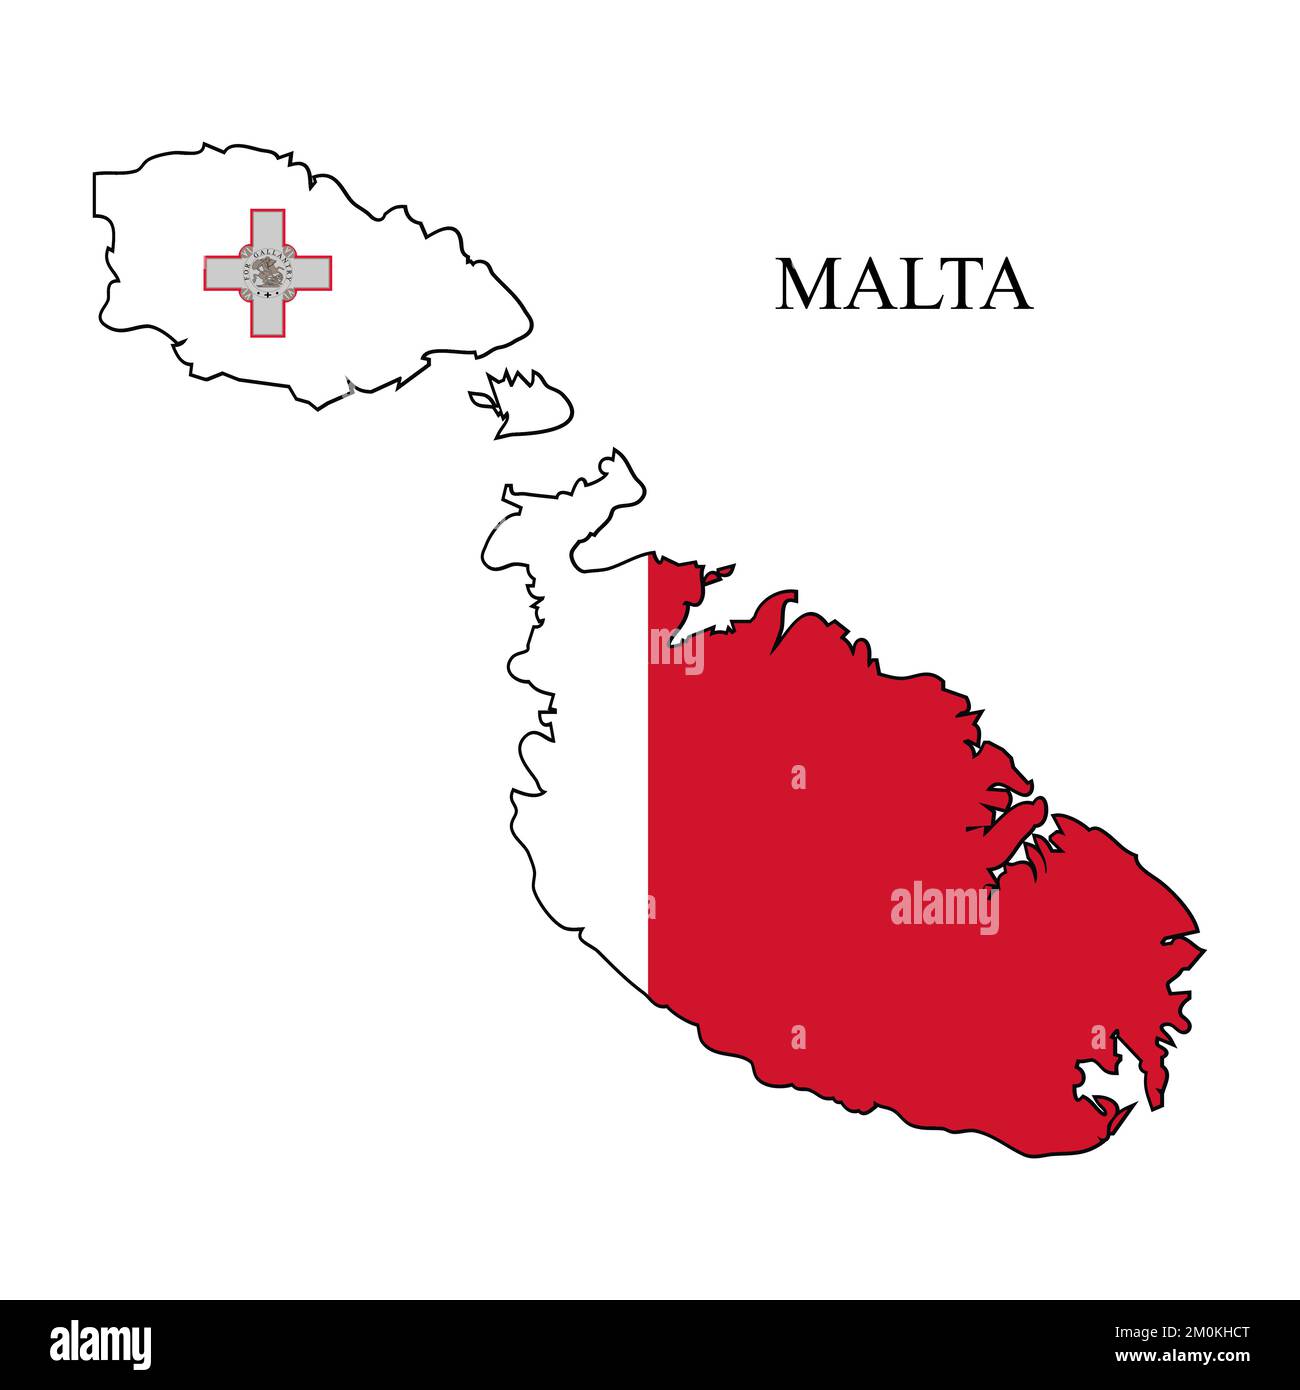 Malta map vector illustration. Global economy. Famous country. Southern Europe. Europe. Stock Vector